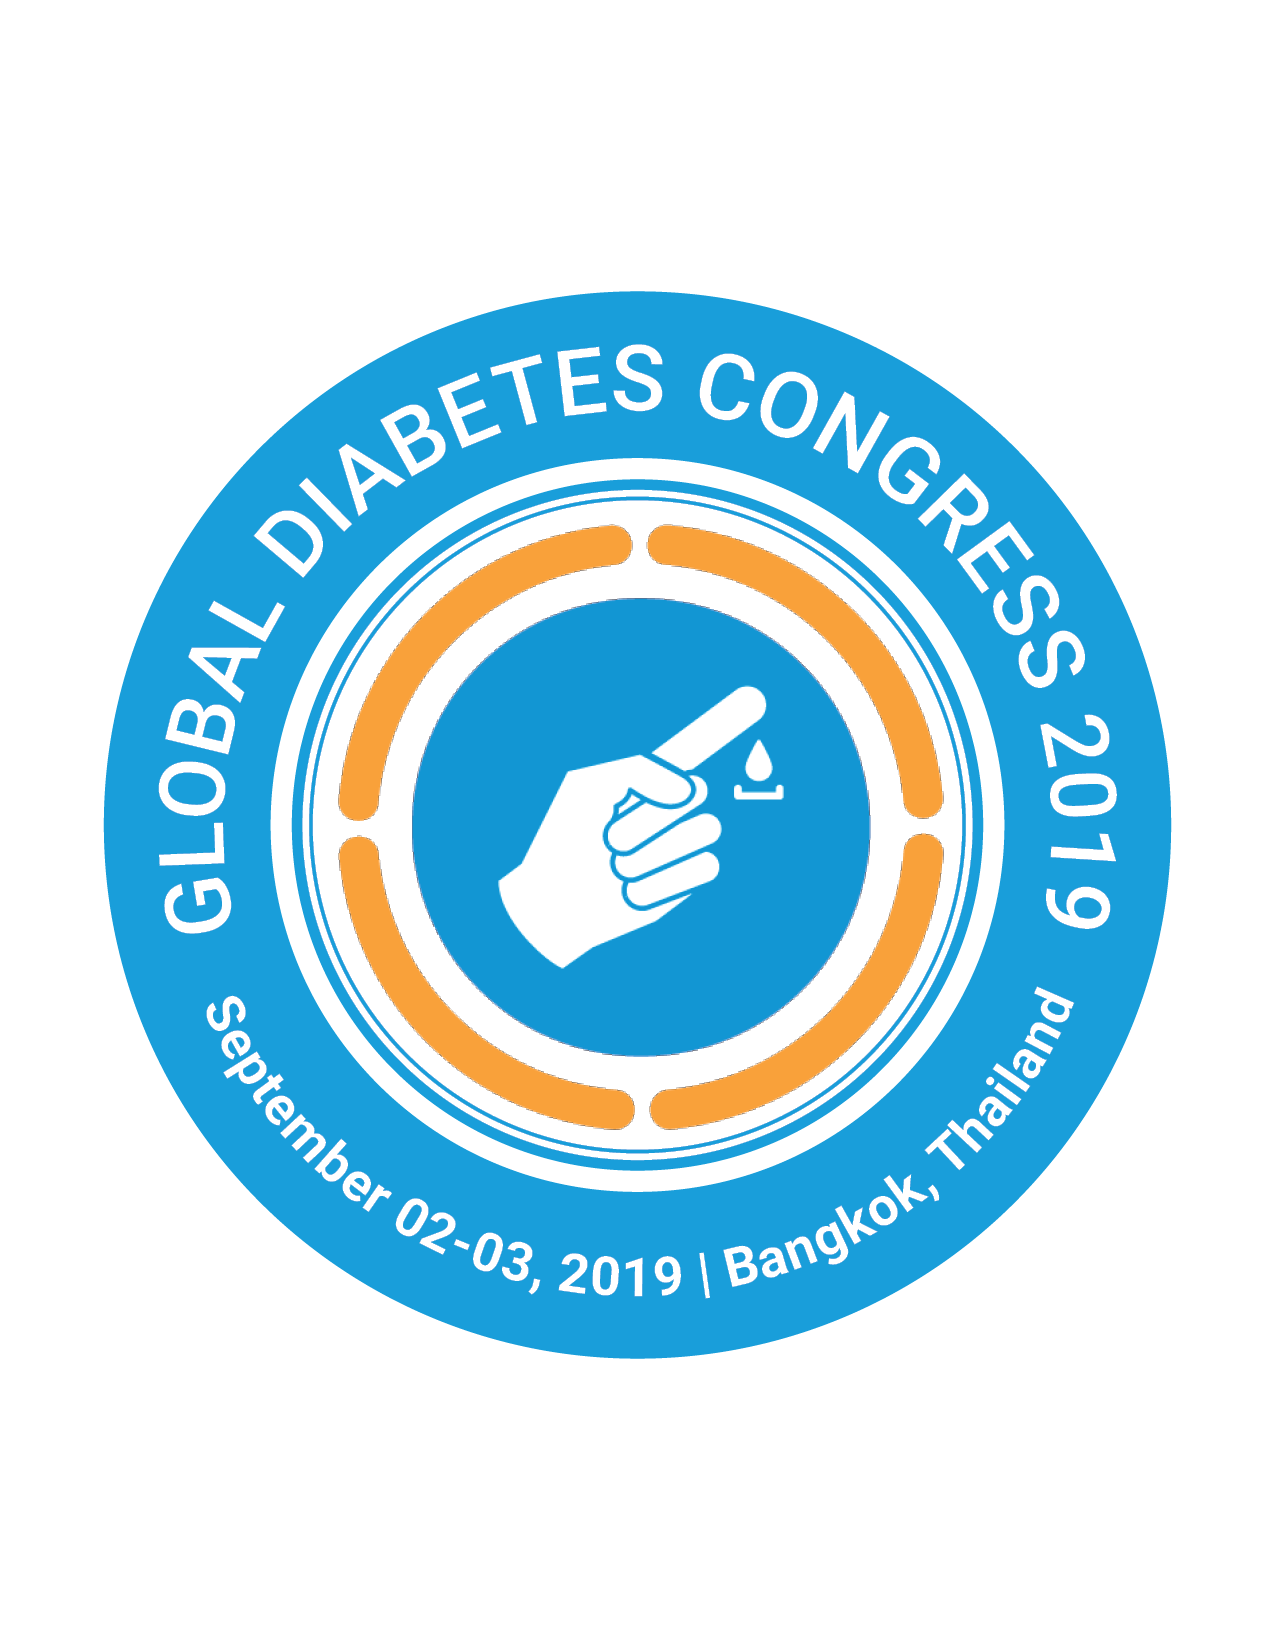 2nd International Conference on Global Diabetes, Obesity, Health and Medicare Expo